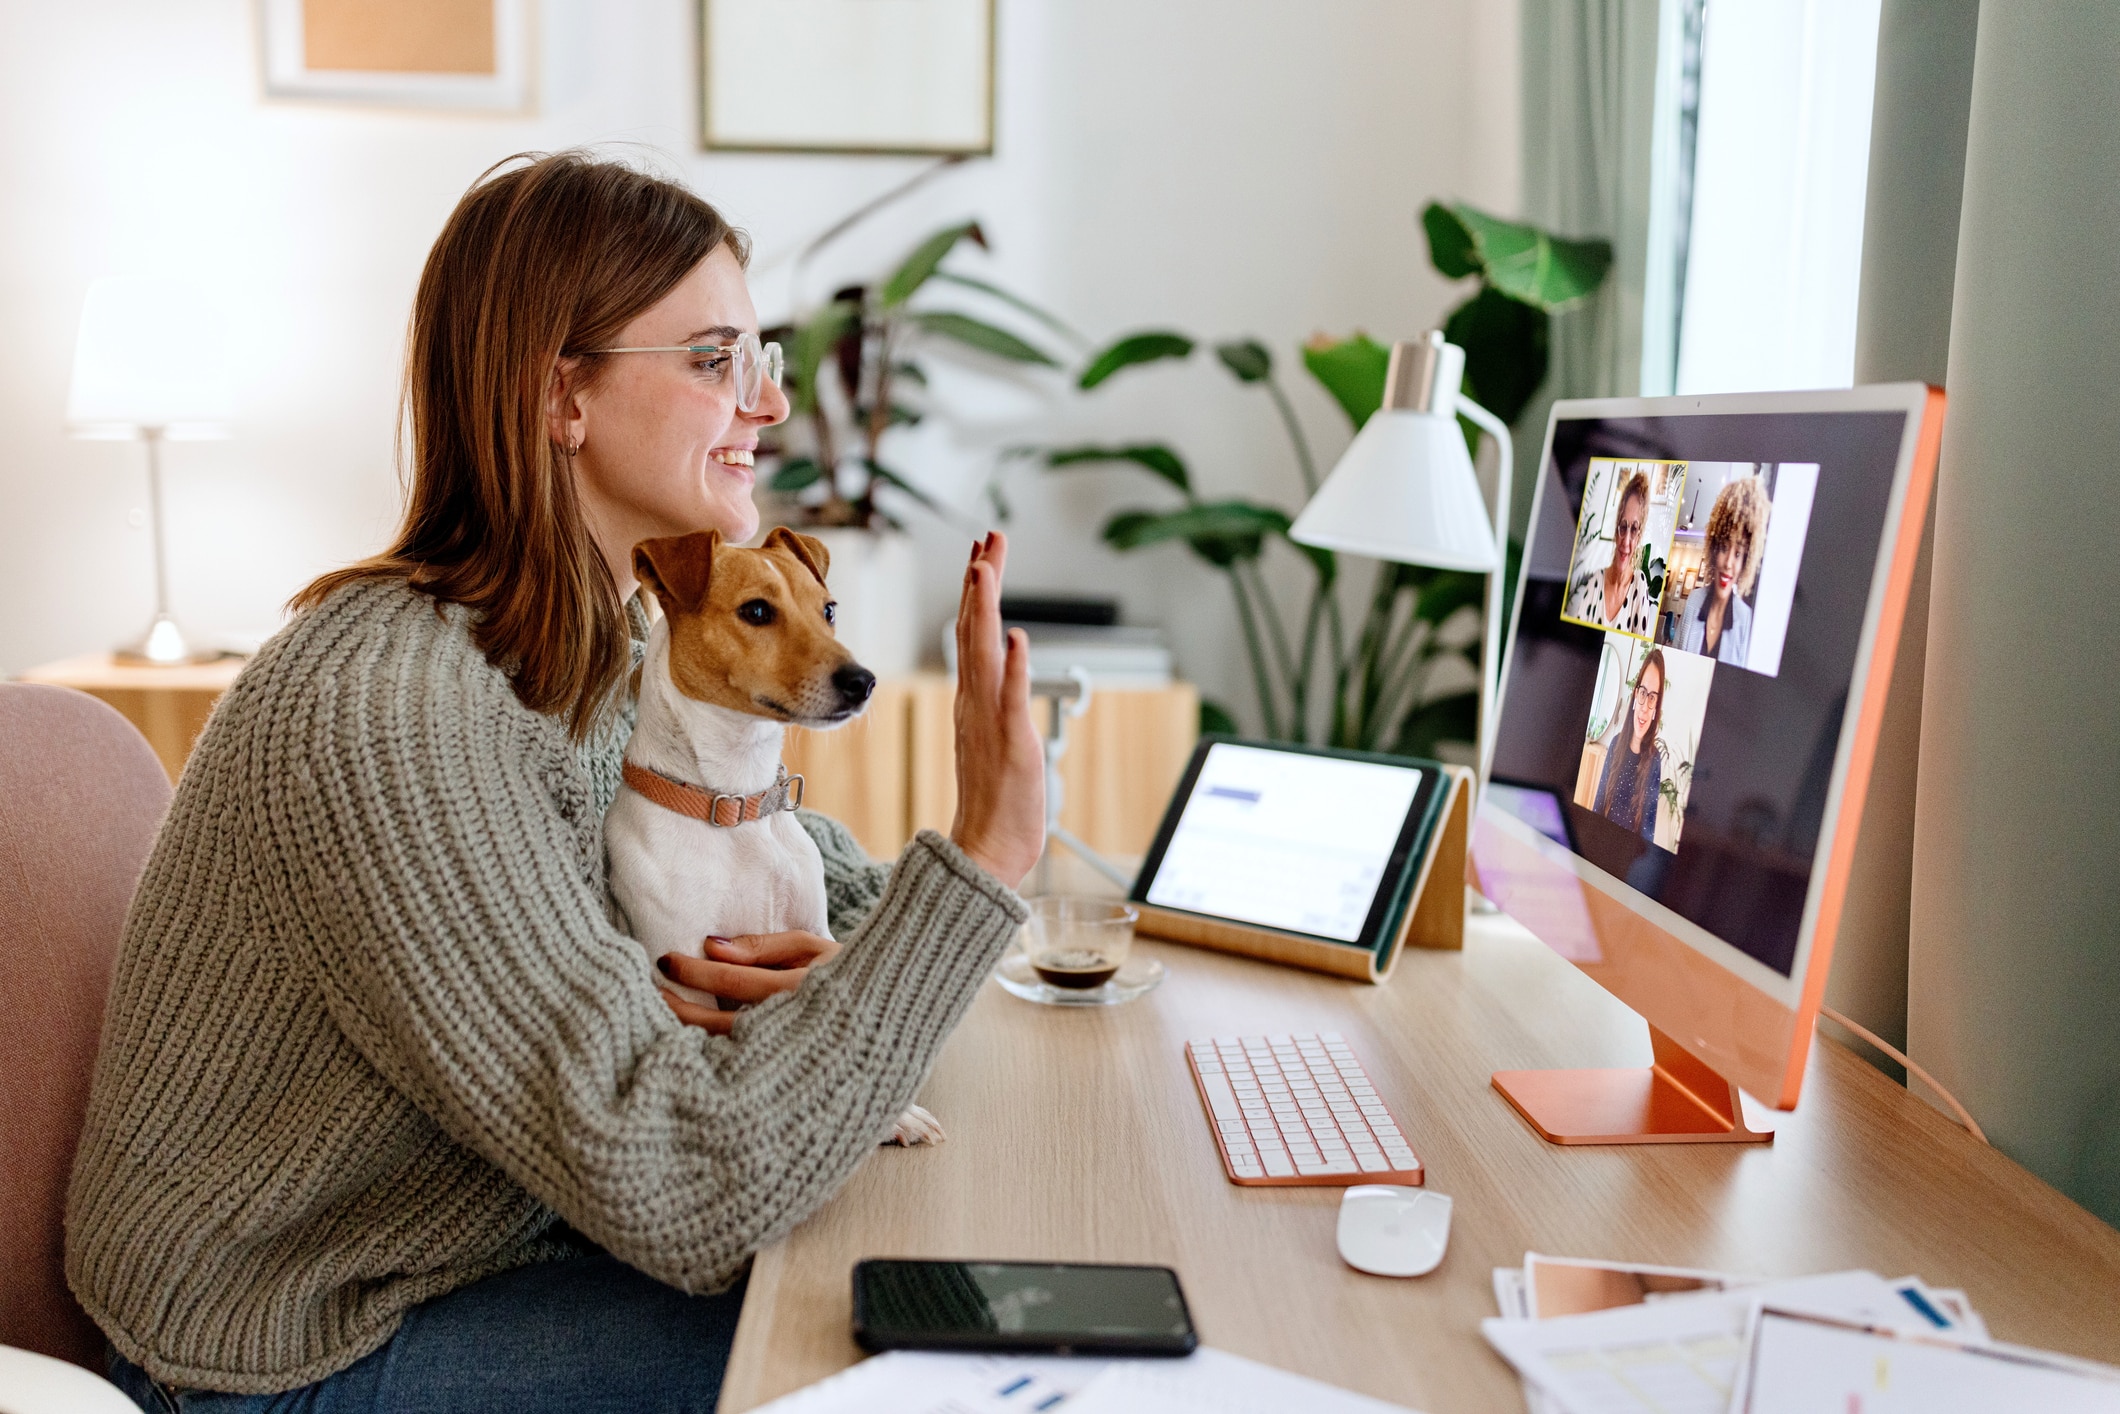 Woman waving at coworkers on a video call meeting at home. She is sitting at her desk with a small brown and white dog in her lap.